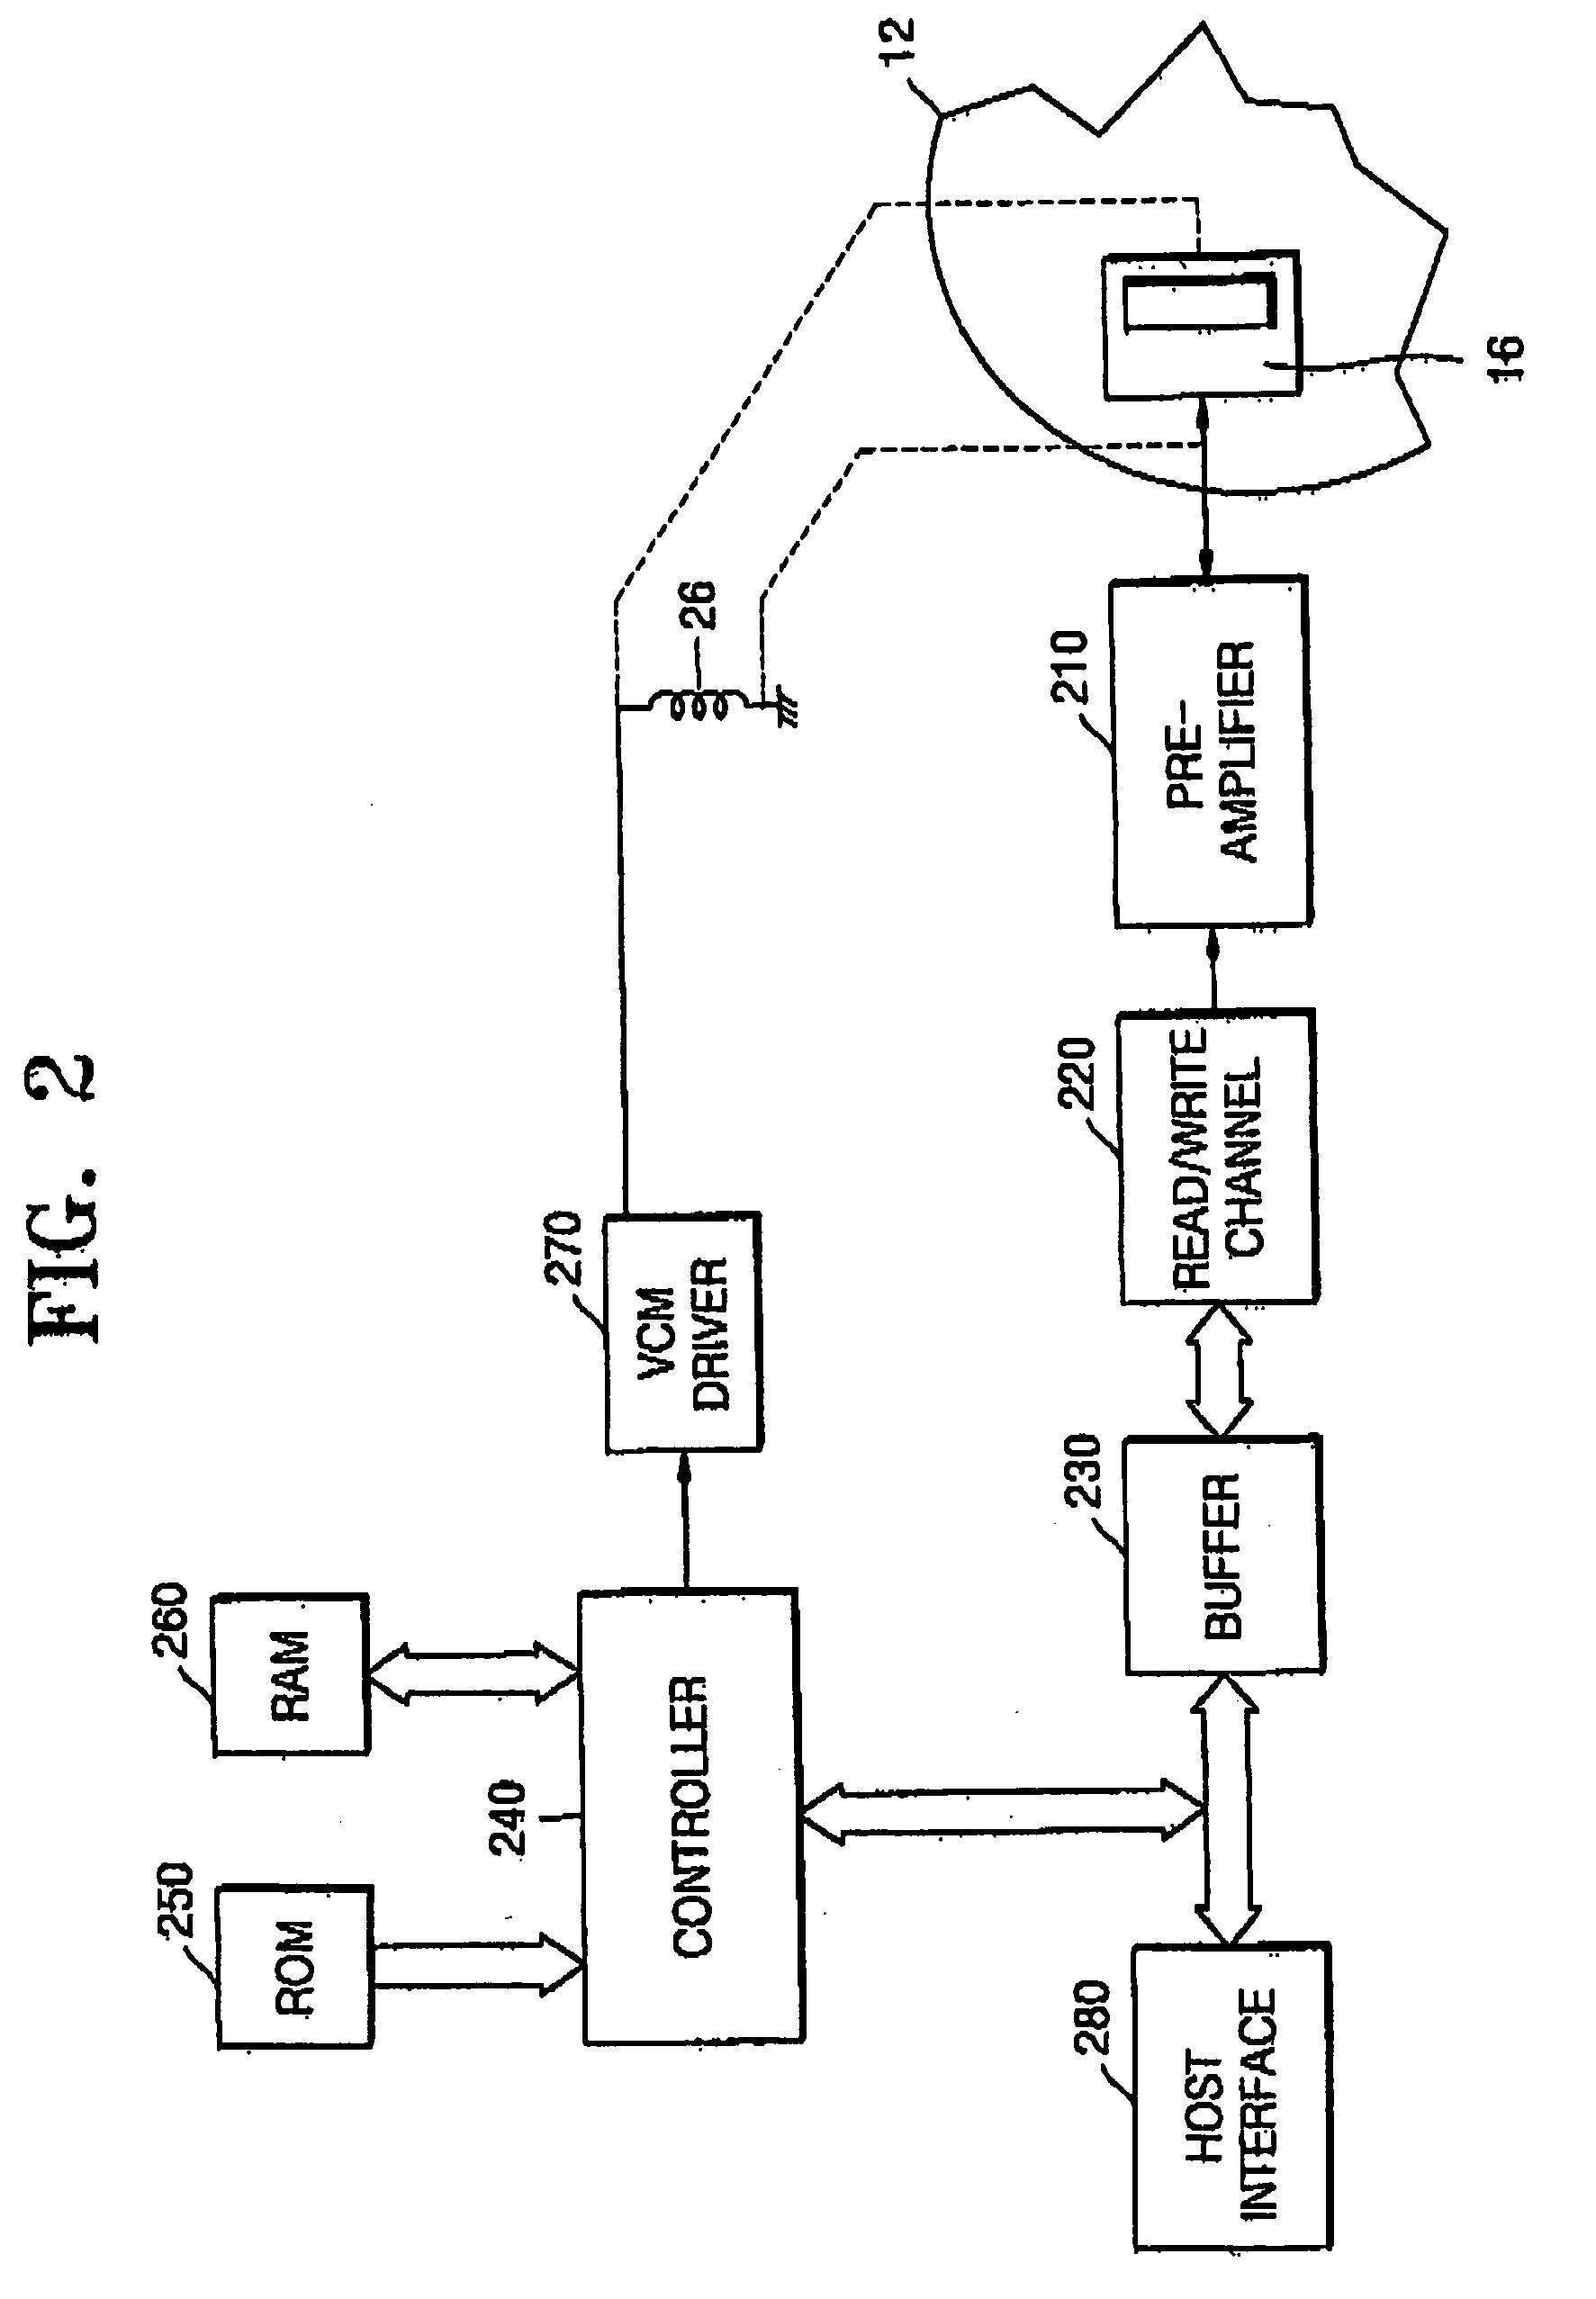 Method of securely erasing data and hard disk drive using the same